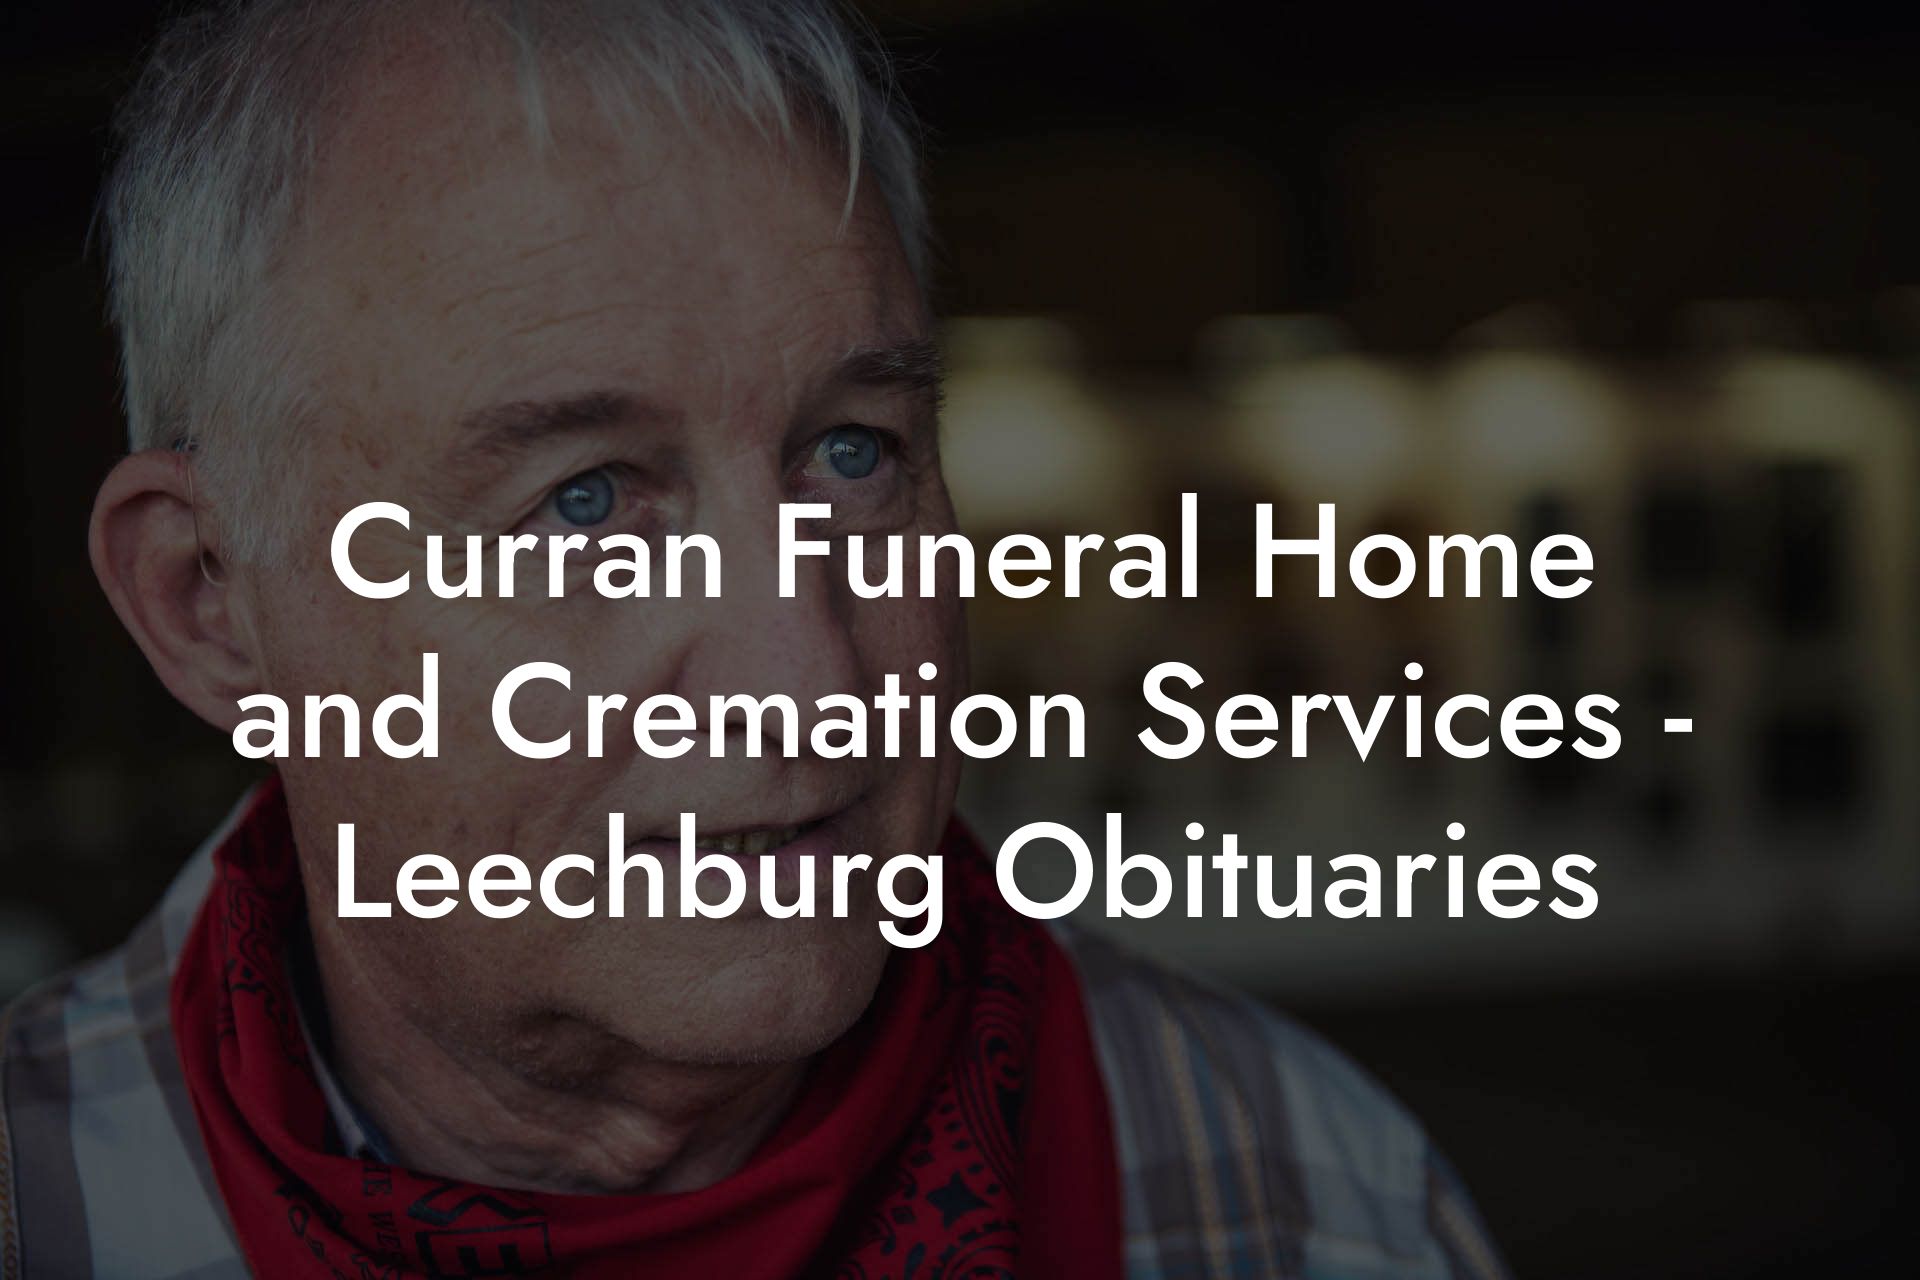 Curran Funeral Home and Cremation Services - Leechburg Obituaries